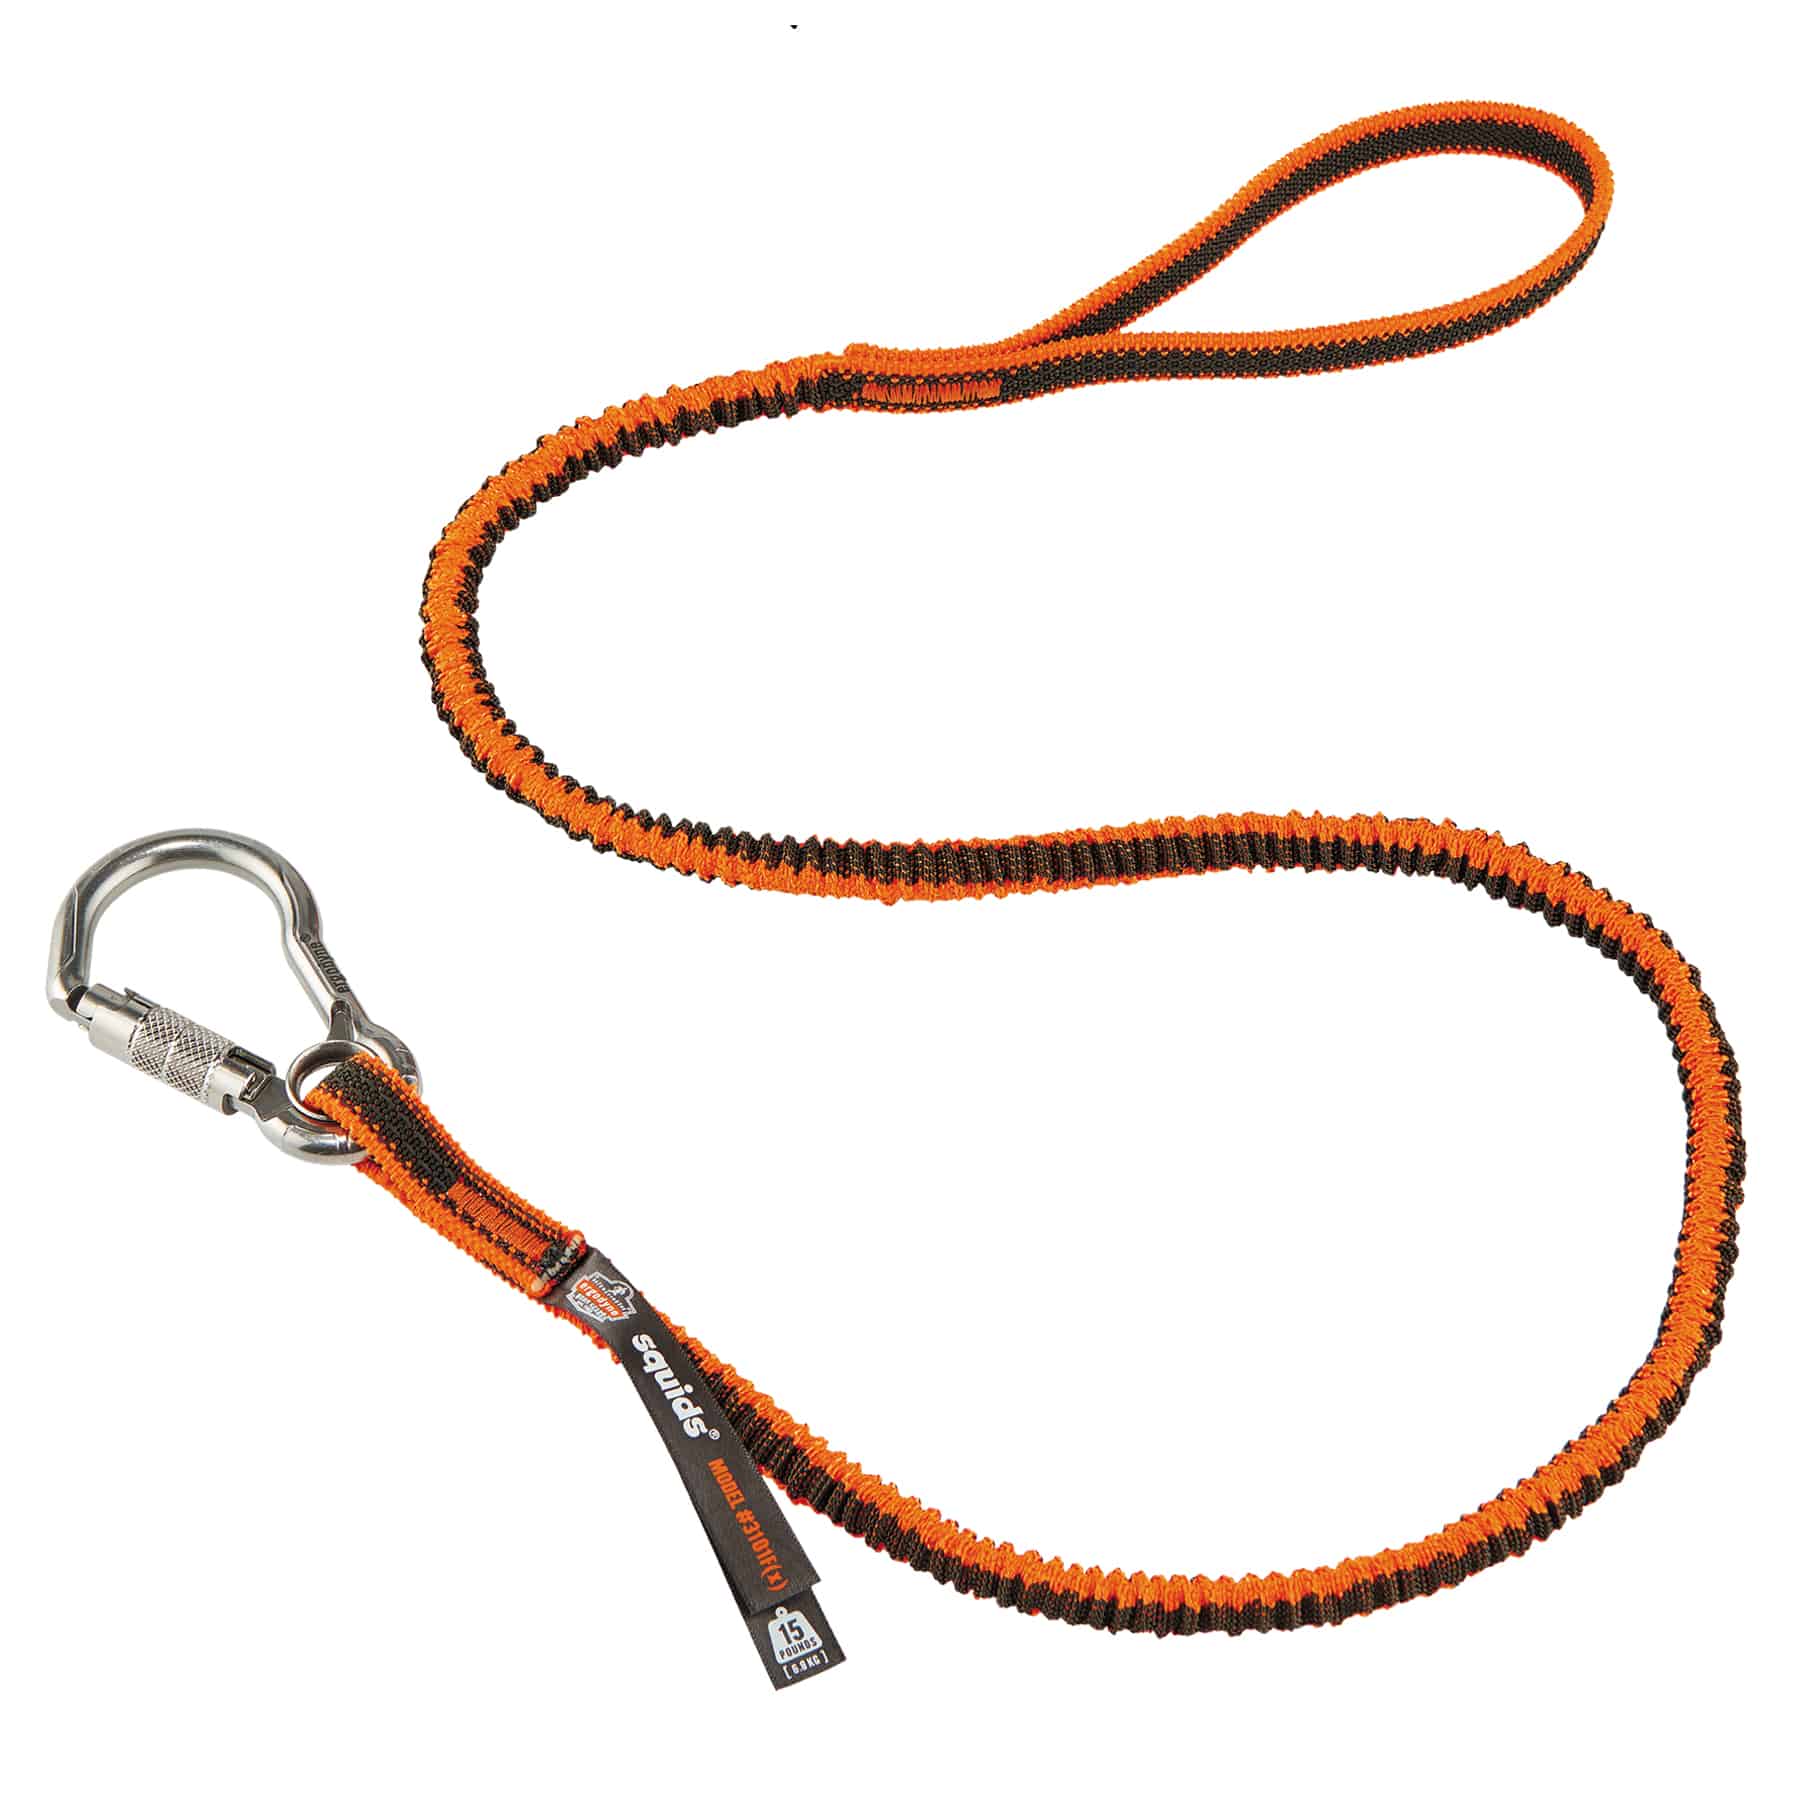 Details about   Komelon Fall Protection Safety Code Coil Tools Holder Lanyards Carabina Keychain 